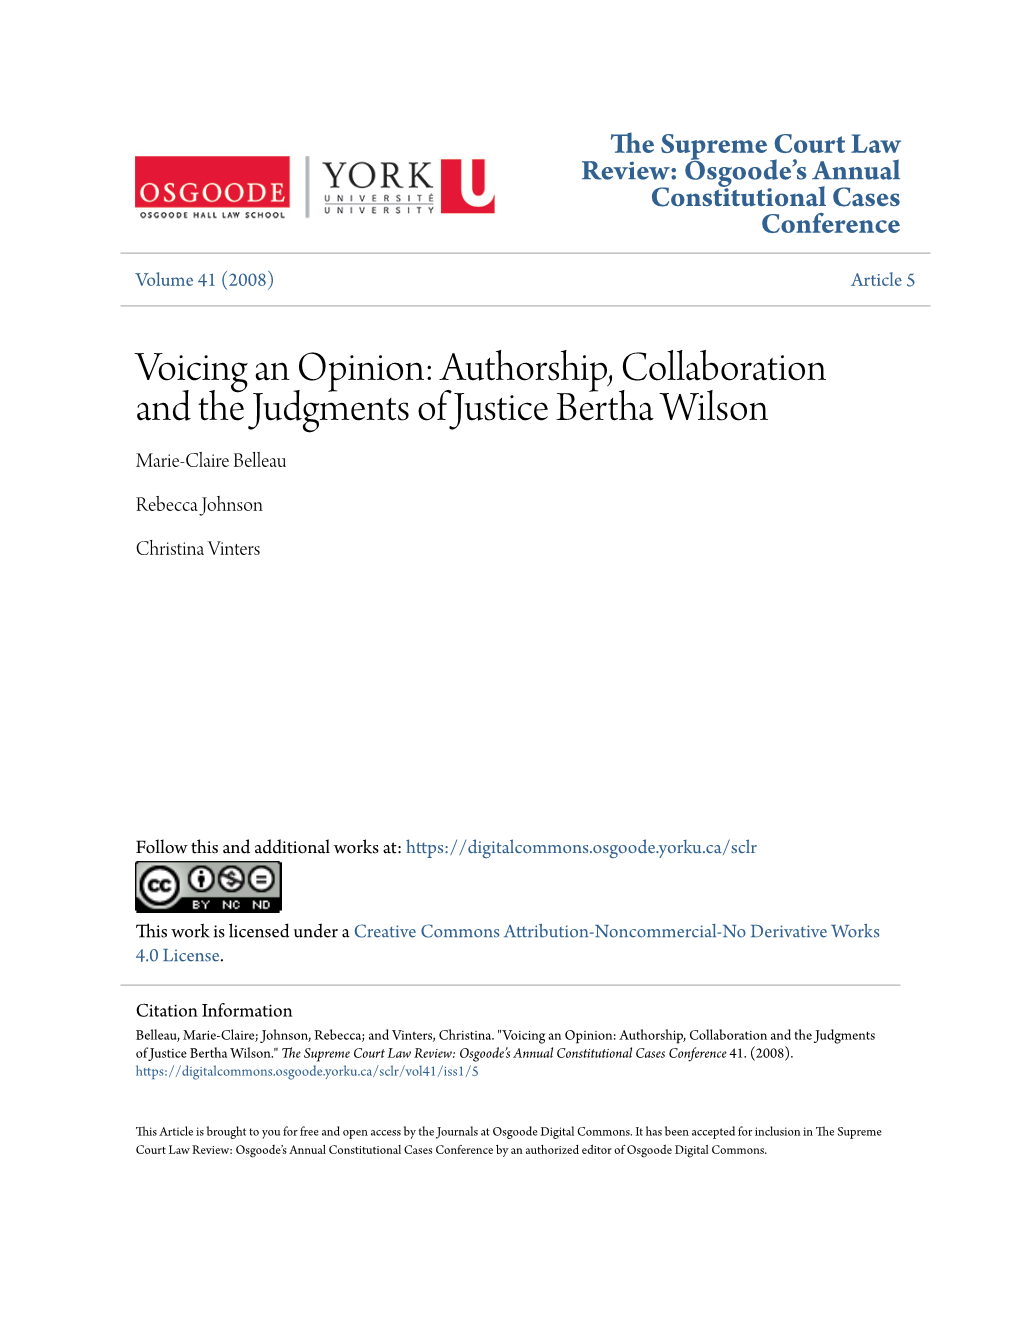 Authorship, Collaboration and the Judgments of Justice Bertha Wilson Marie-Claire Belleau